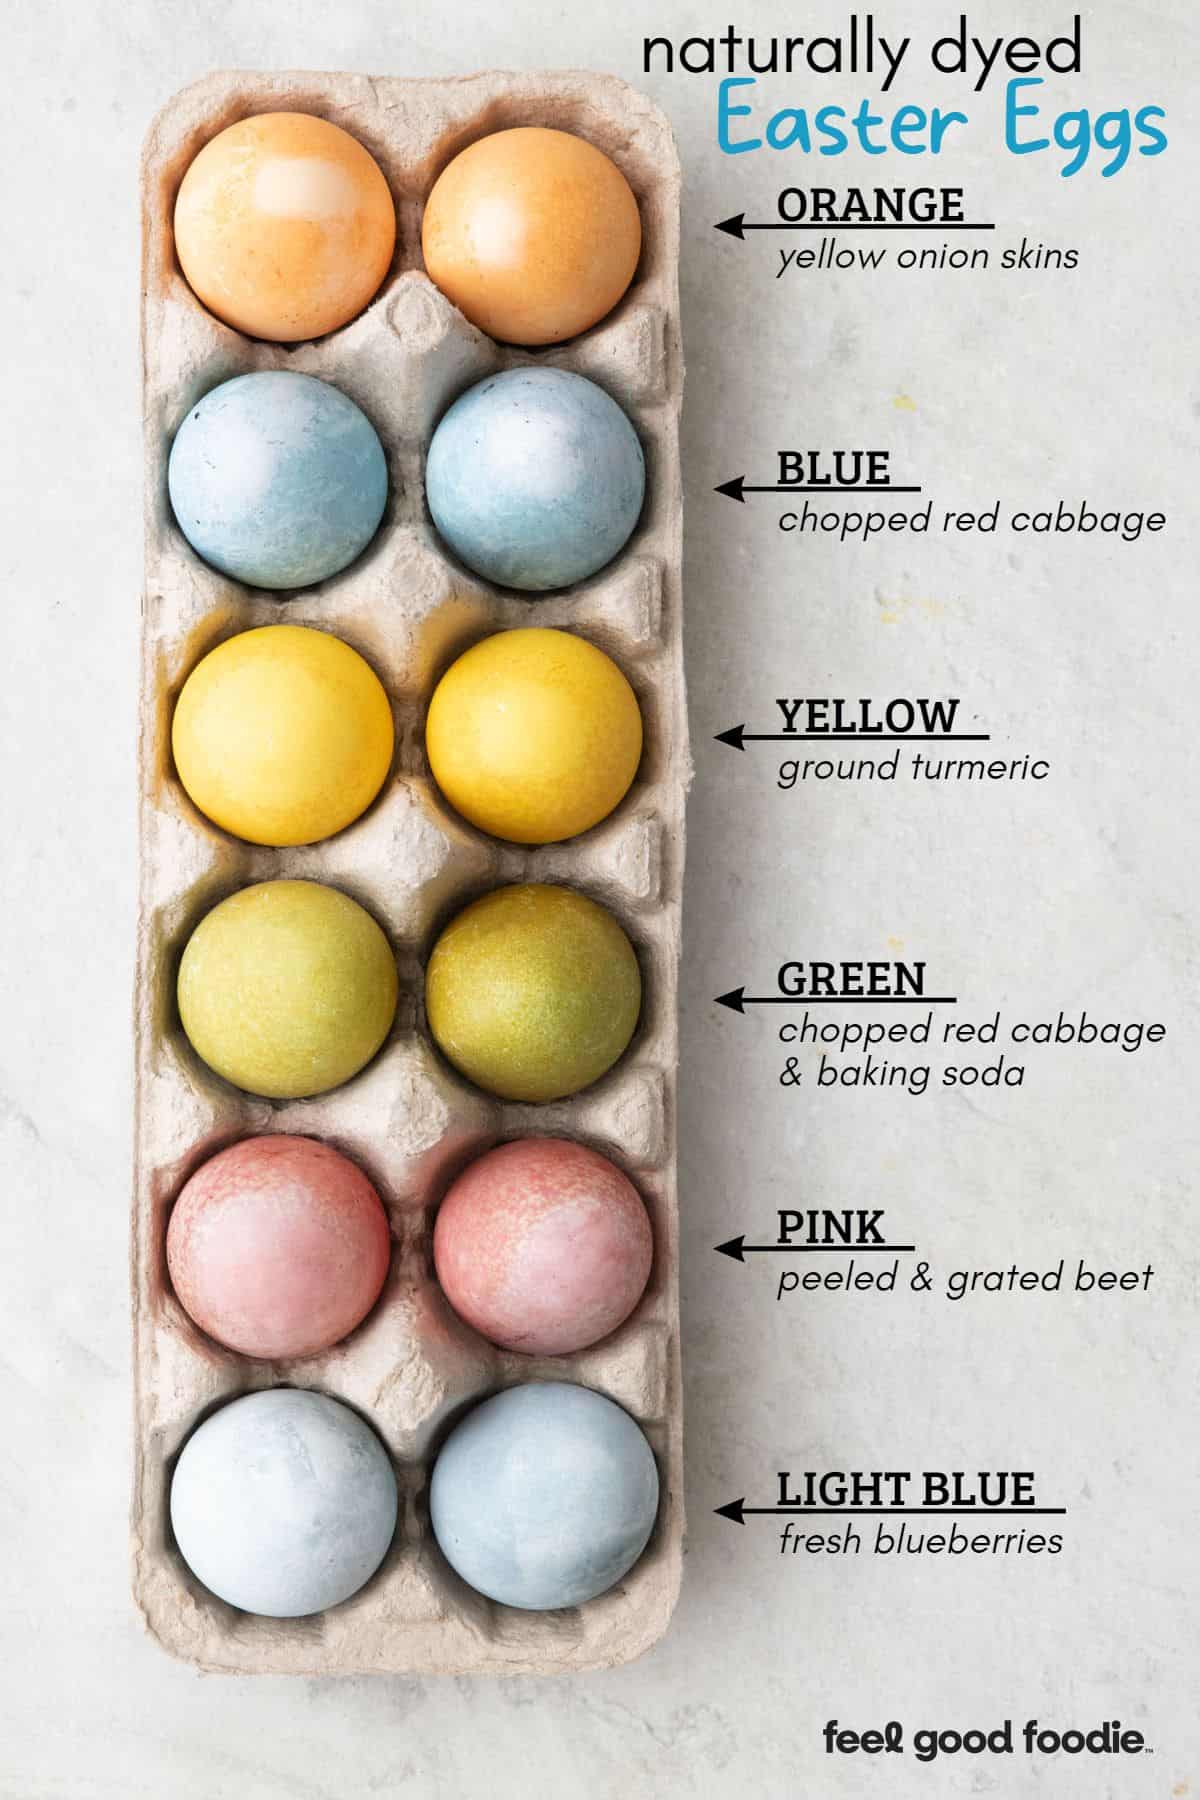 Naturally dyed easter egg chart for 6 different colors: orange, blue, yellow, green, pink, and light blue.